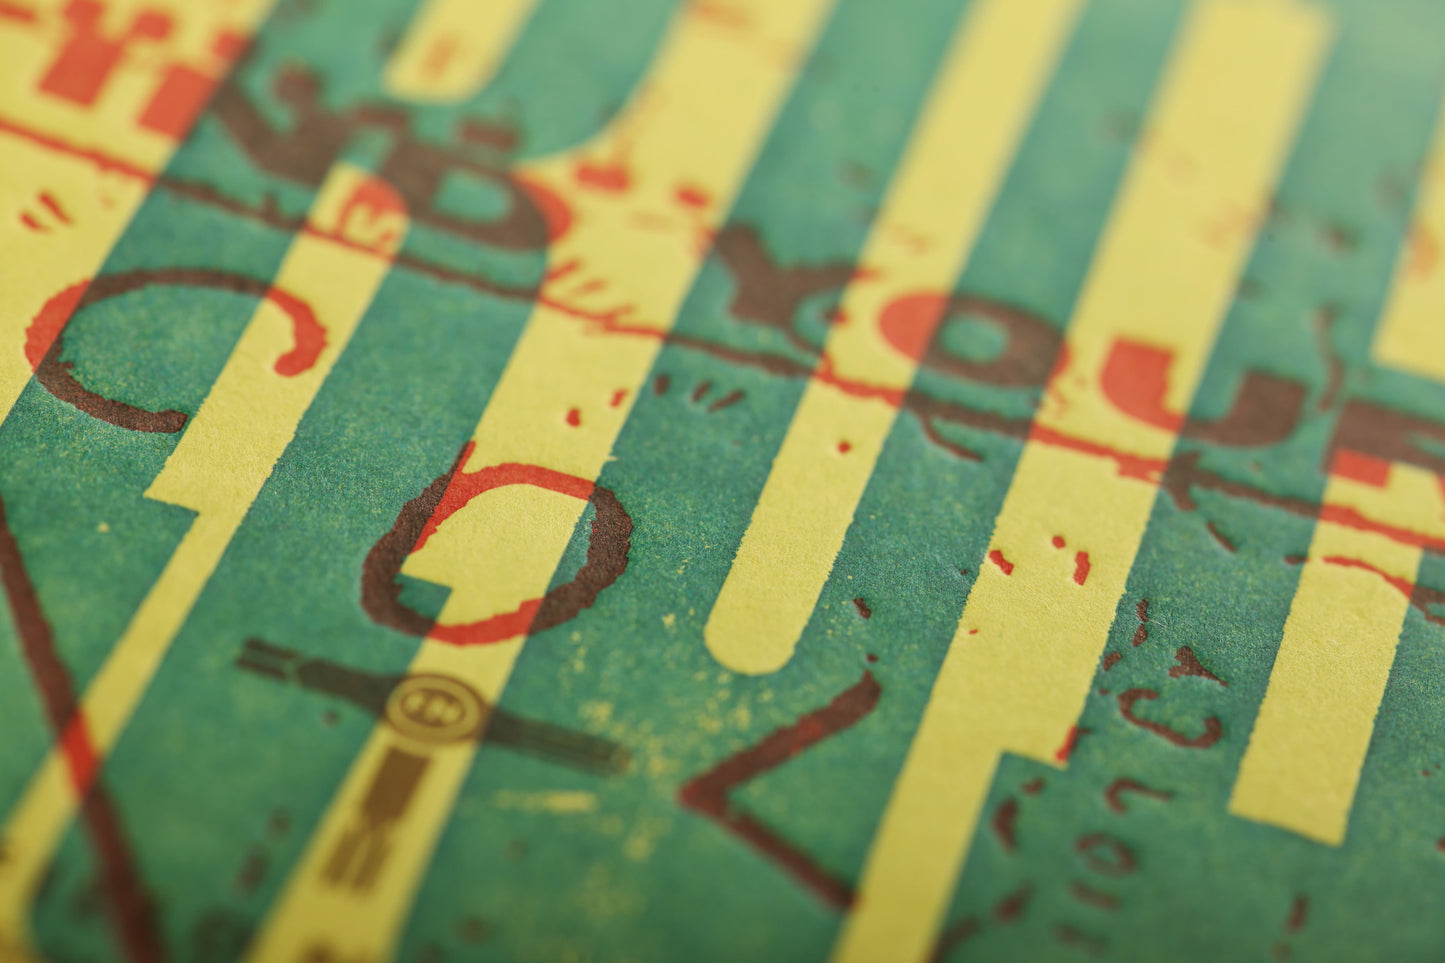 FIELD NOTES, United States of Letterpress